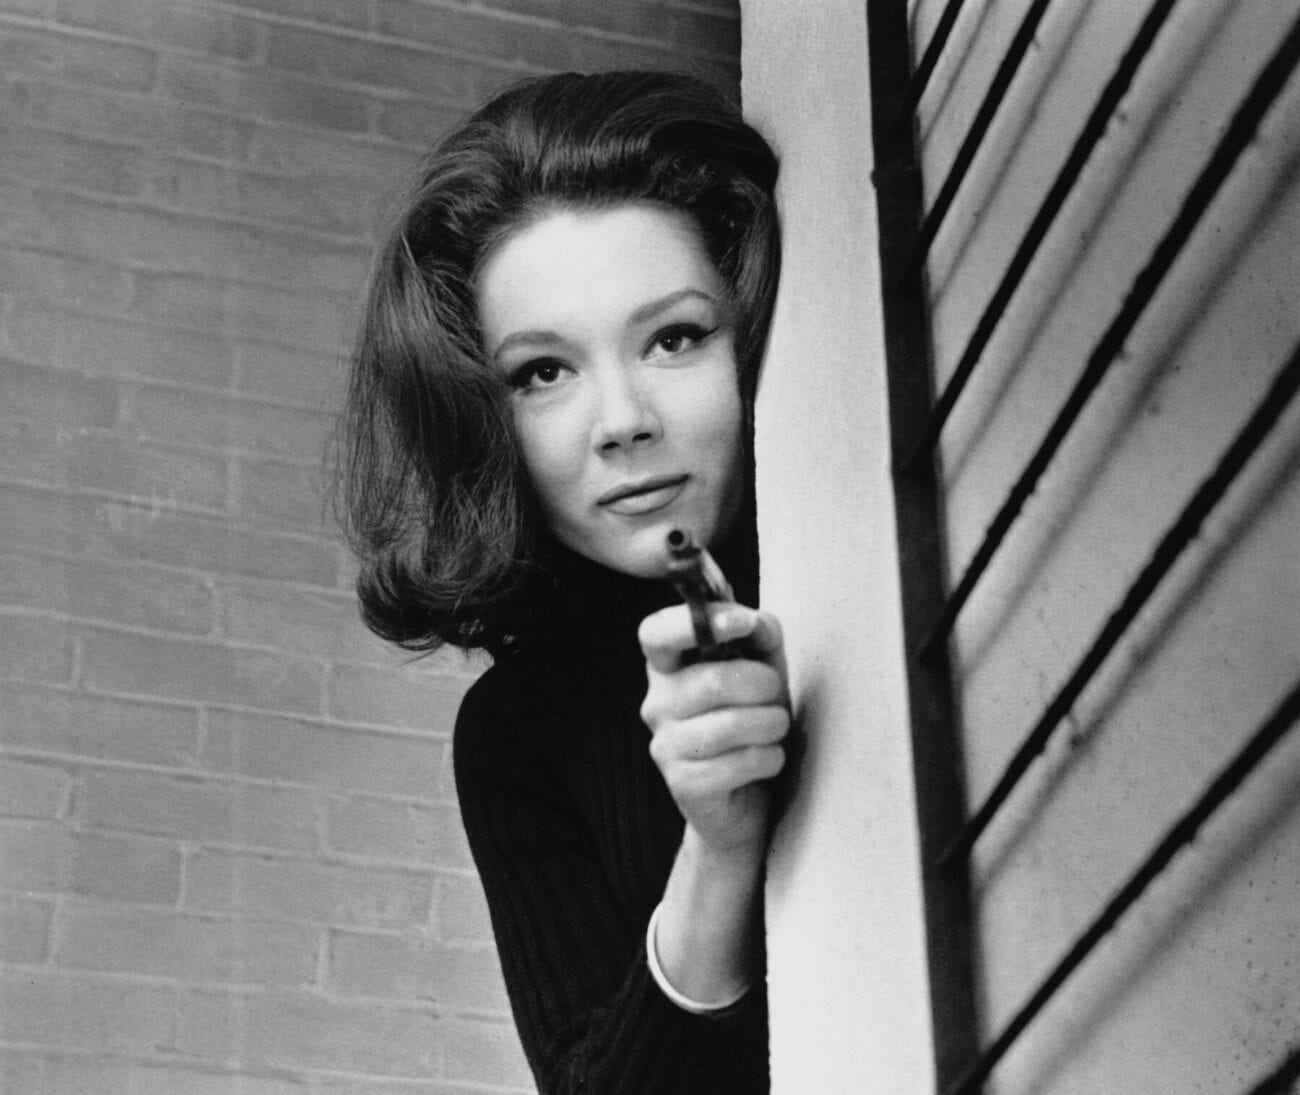 Diana Rigg had a long, legendary acting career. Read our tribute to the late actress and learn about her life and work.